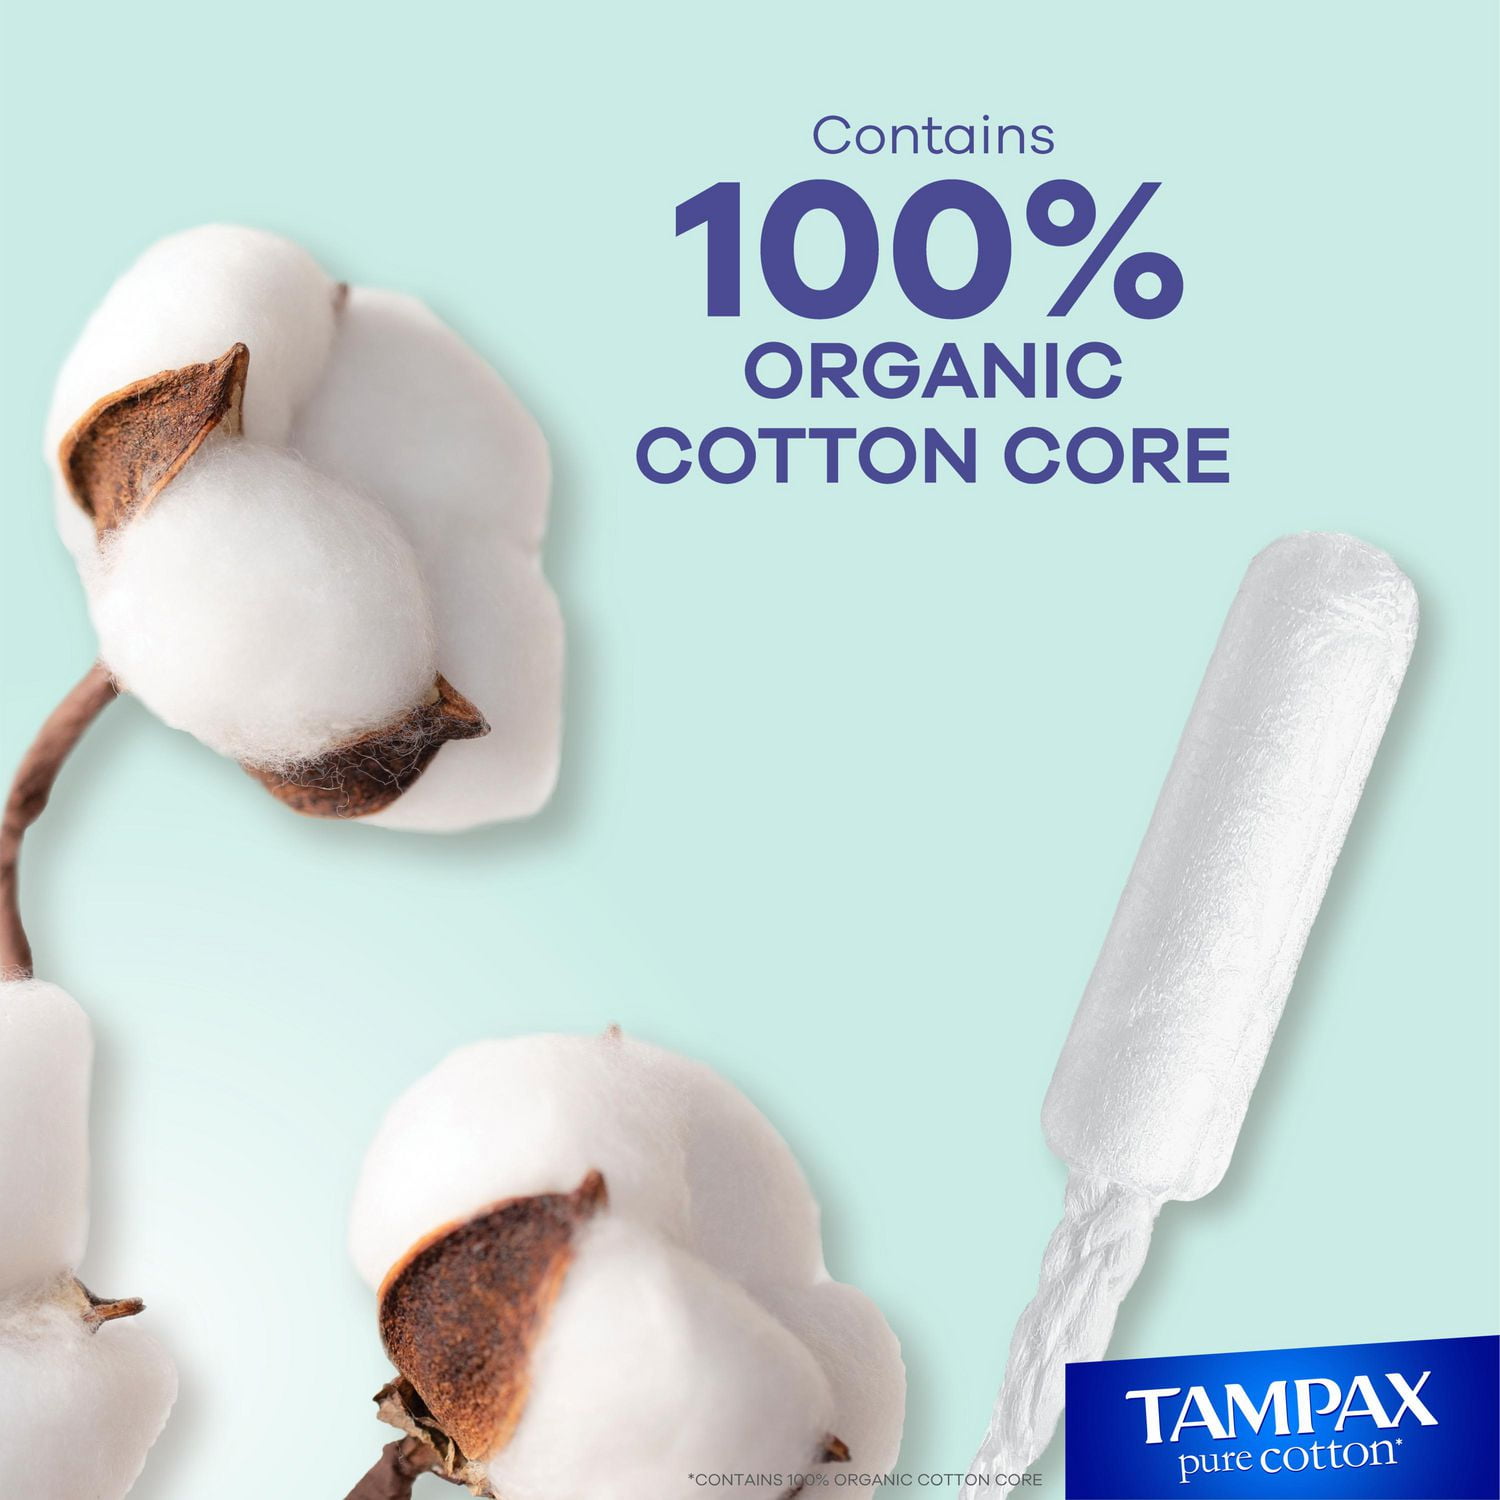 Tampax Pure Cotton Tampons, Contains 100% Organic Cotton Core, Super  Absorbency, 24 Ct, Unscented